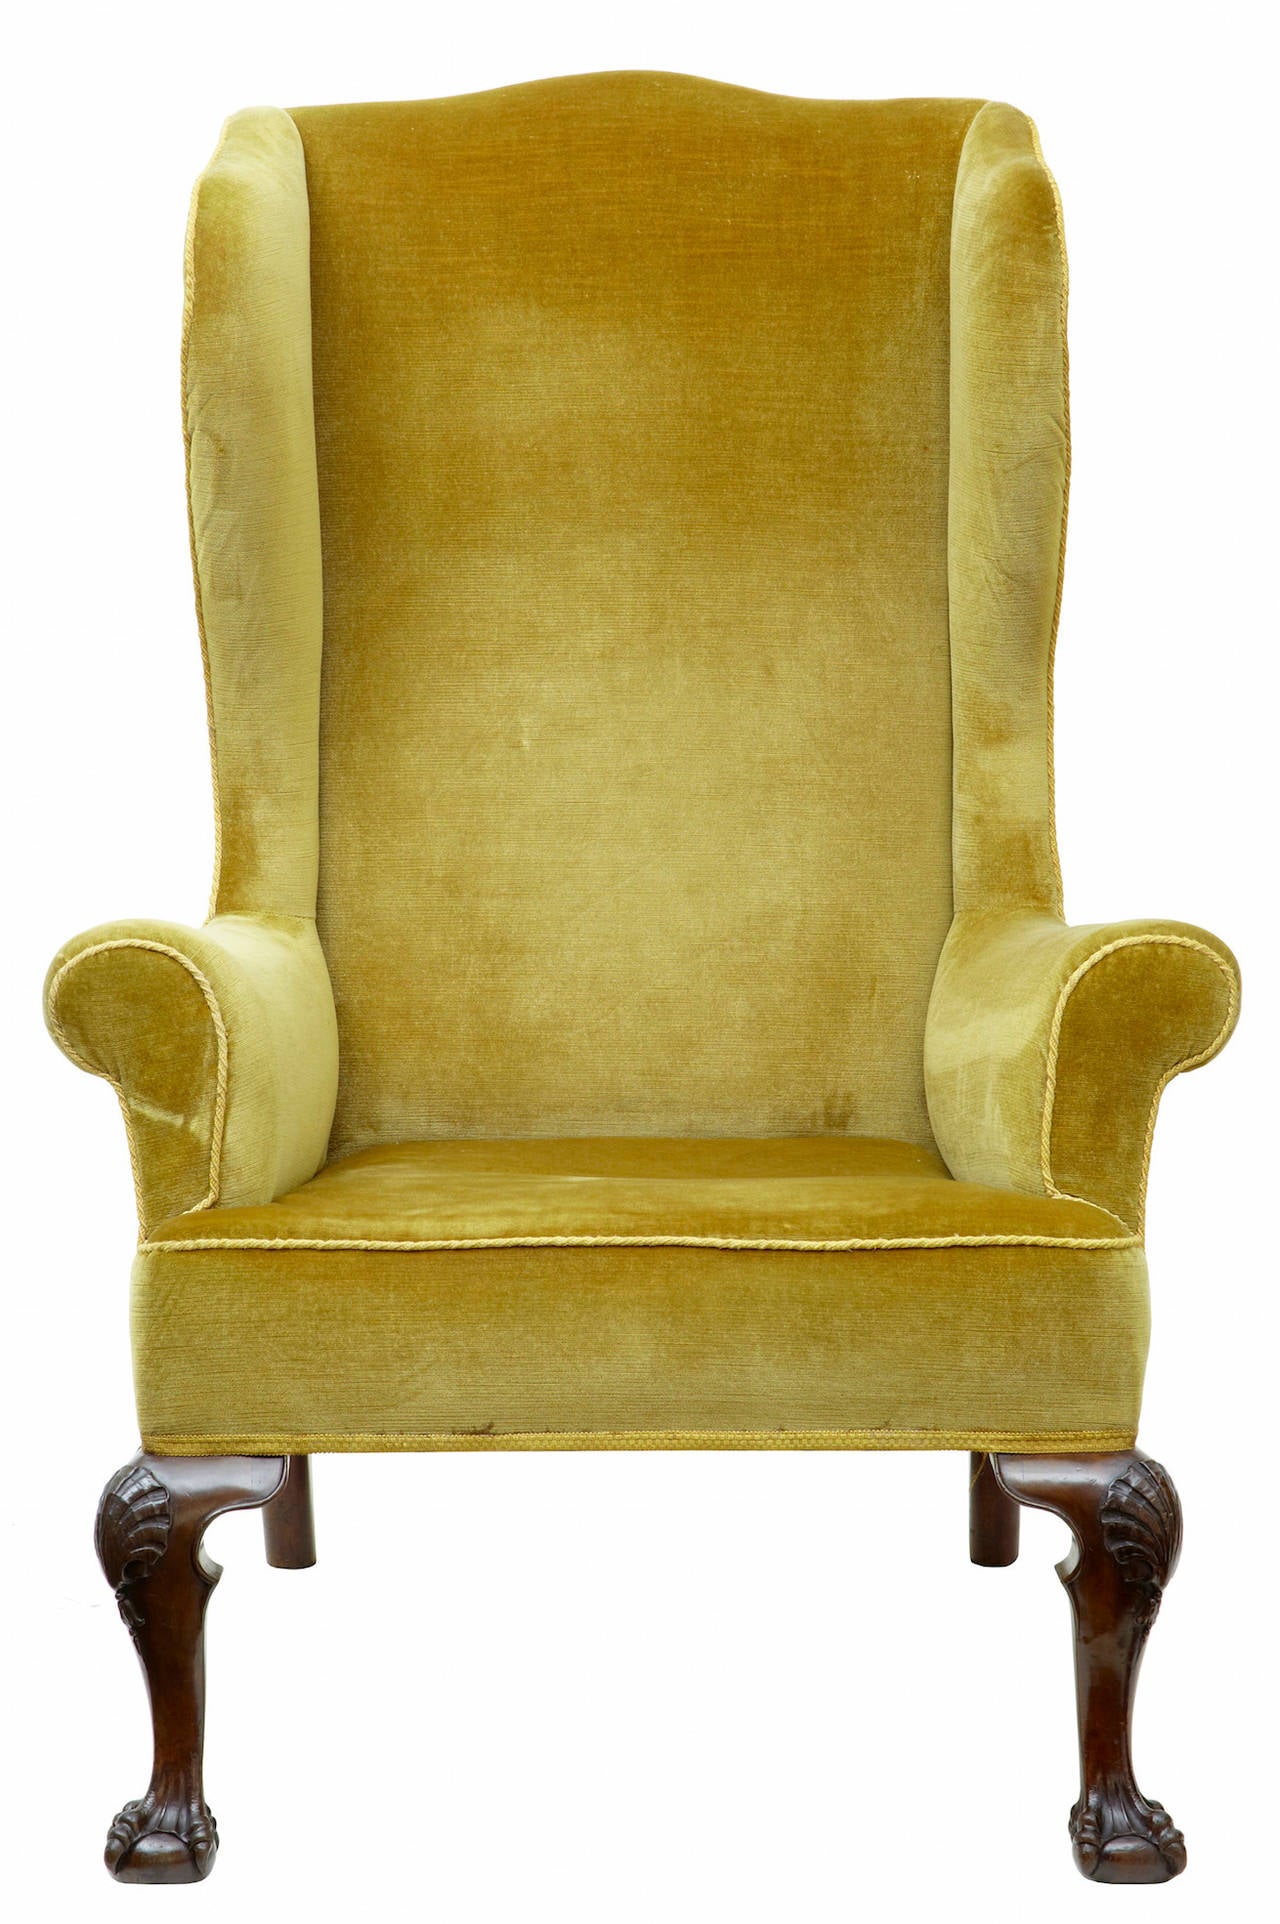 Fine quality Irish oversized armchair circa 1770. 

Very comfortable oversized armchair in golden crushed velvet. Standing on ball and claw feet with carved shell on the knee 

Seat height: 18